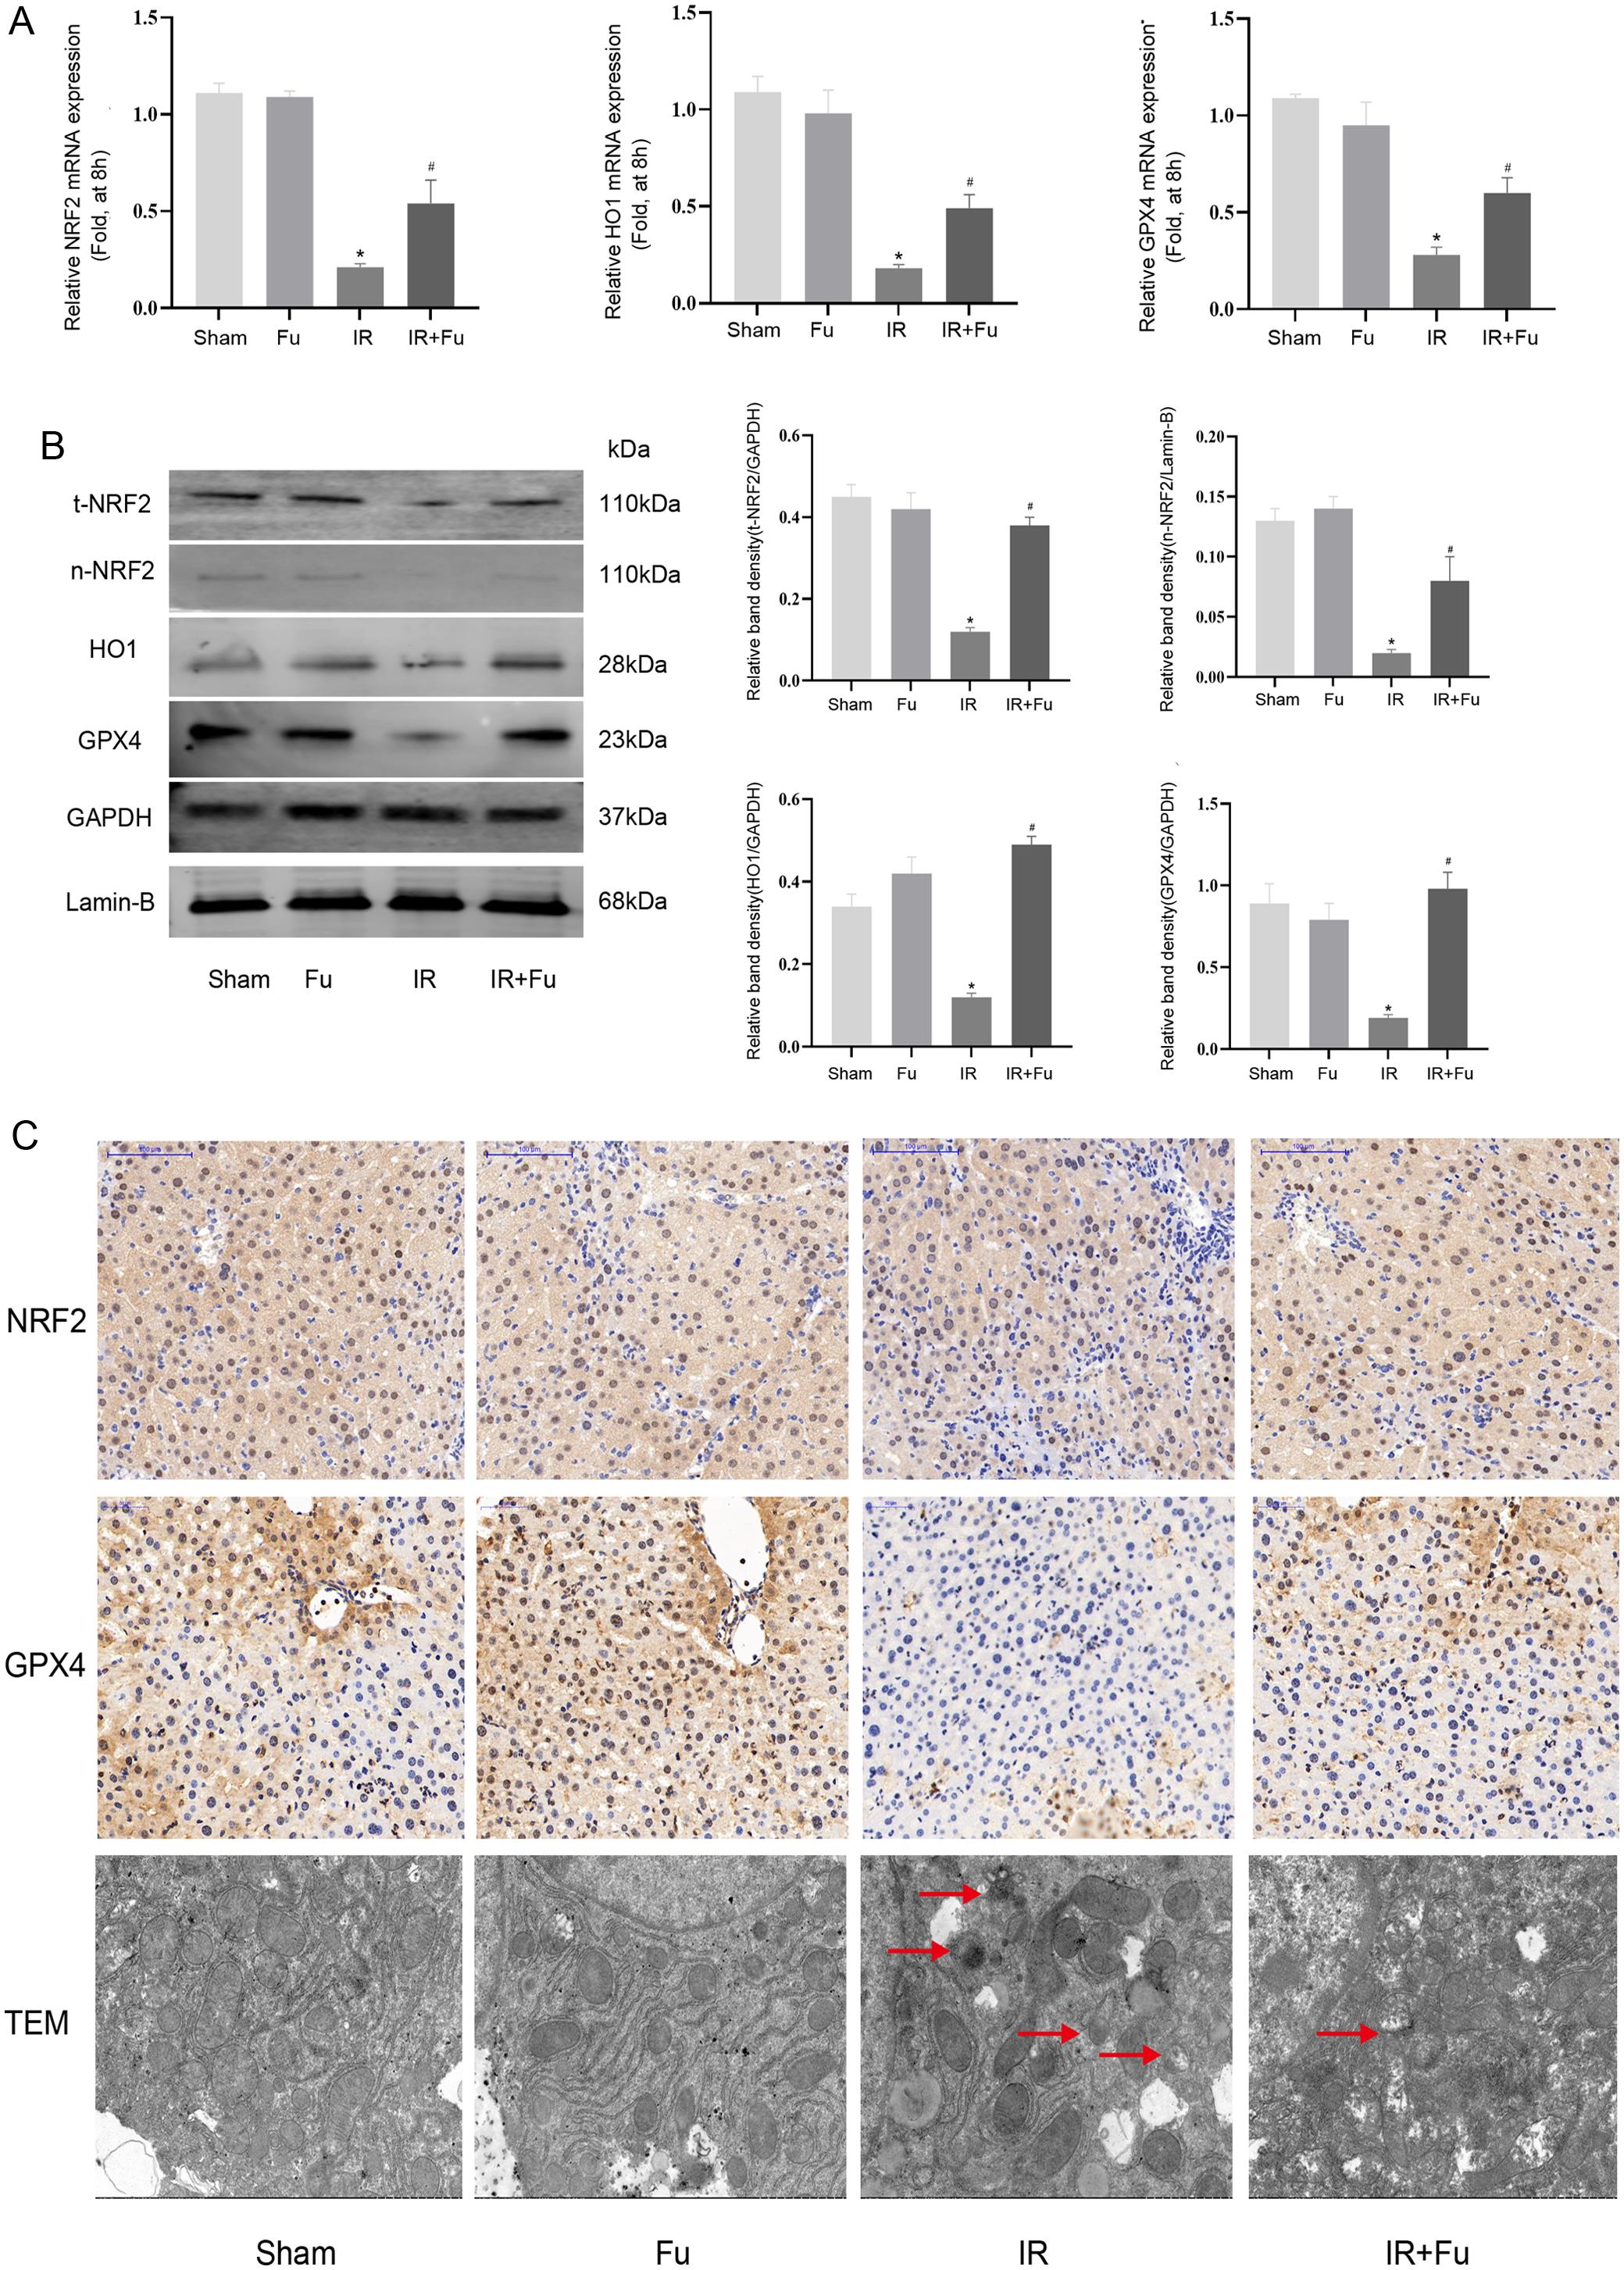 Effect of fucoidan on the Nrf2/HO-1/GPX4 pathway in mice.